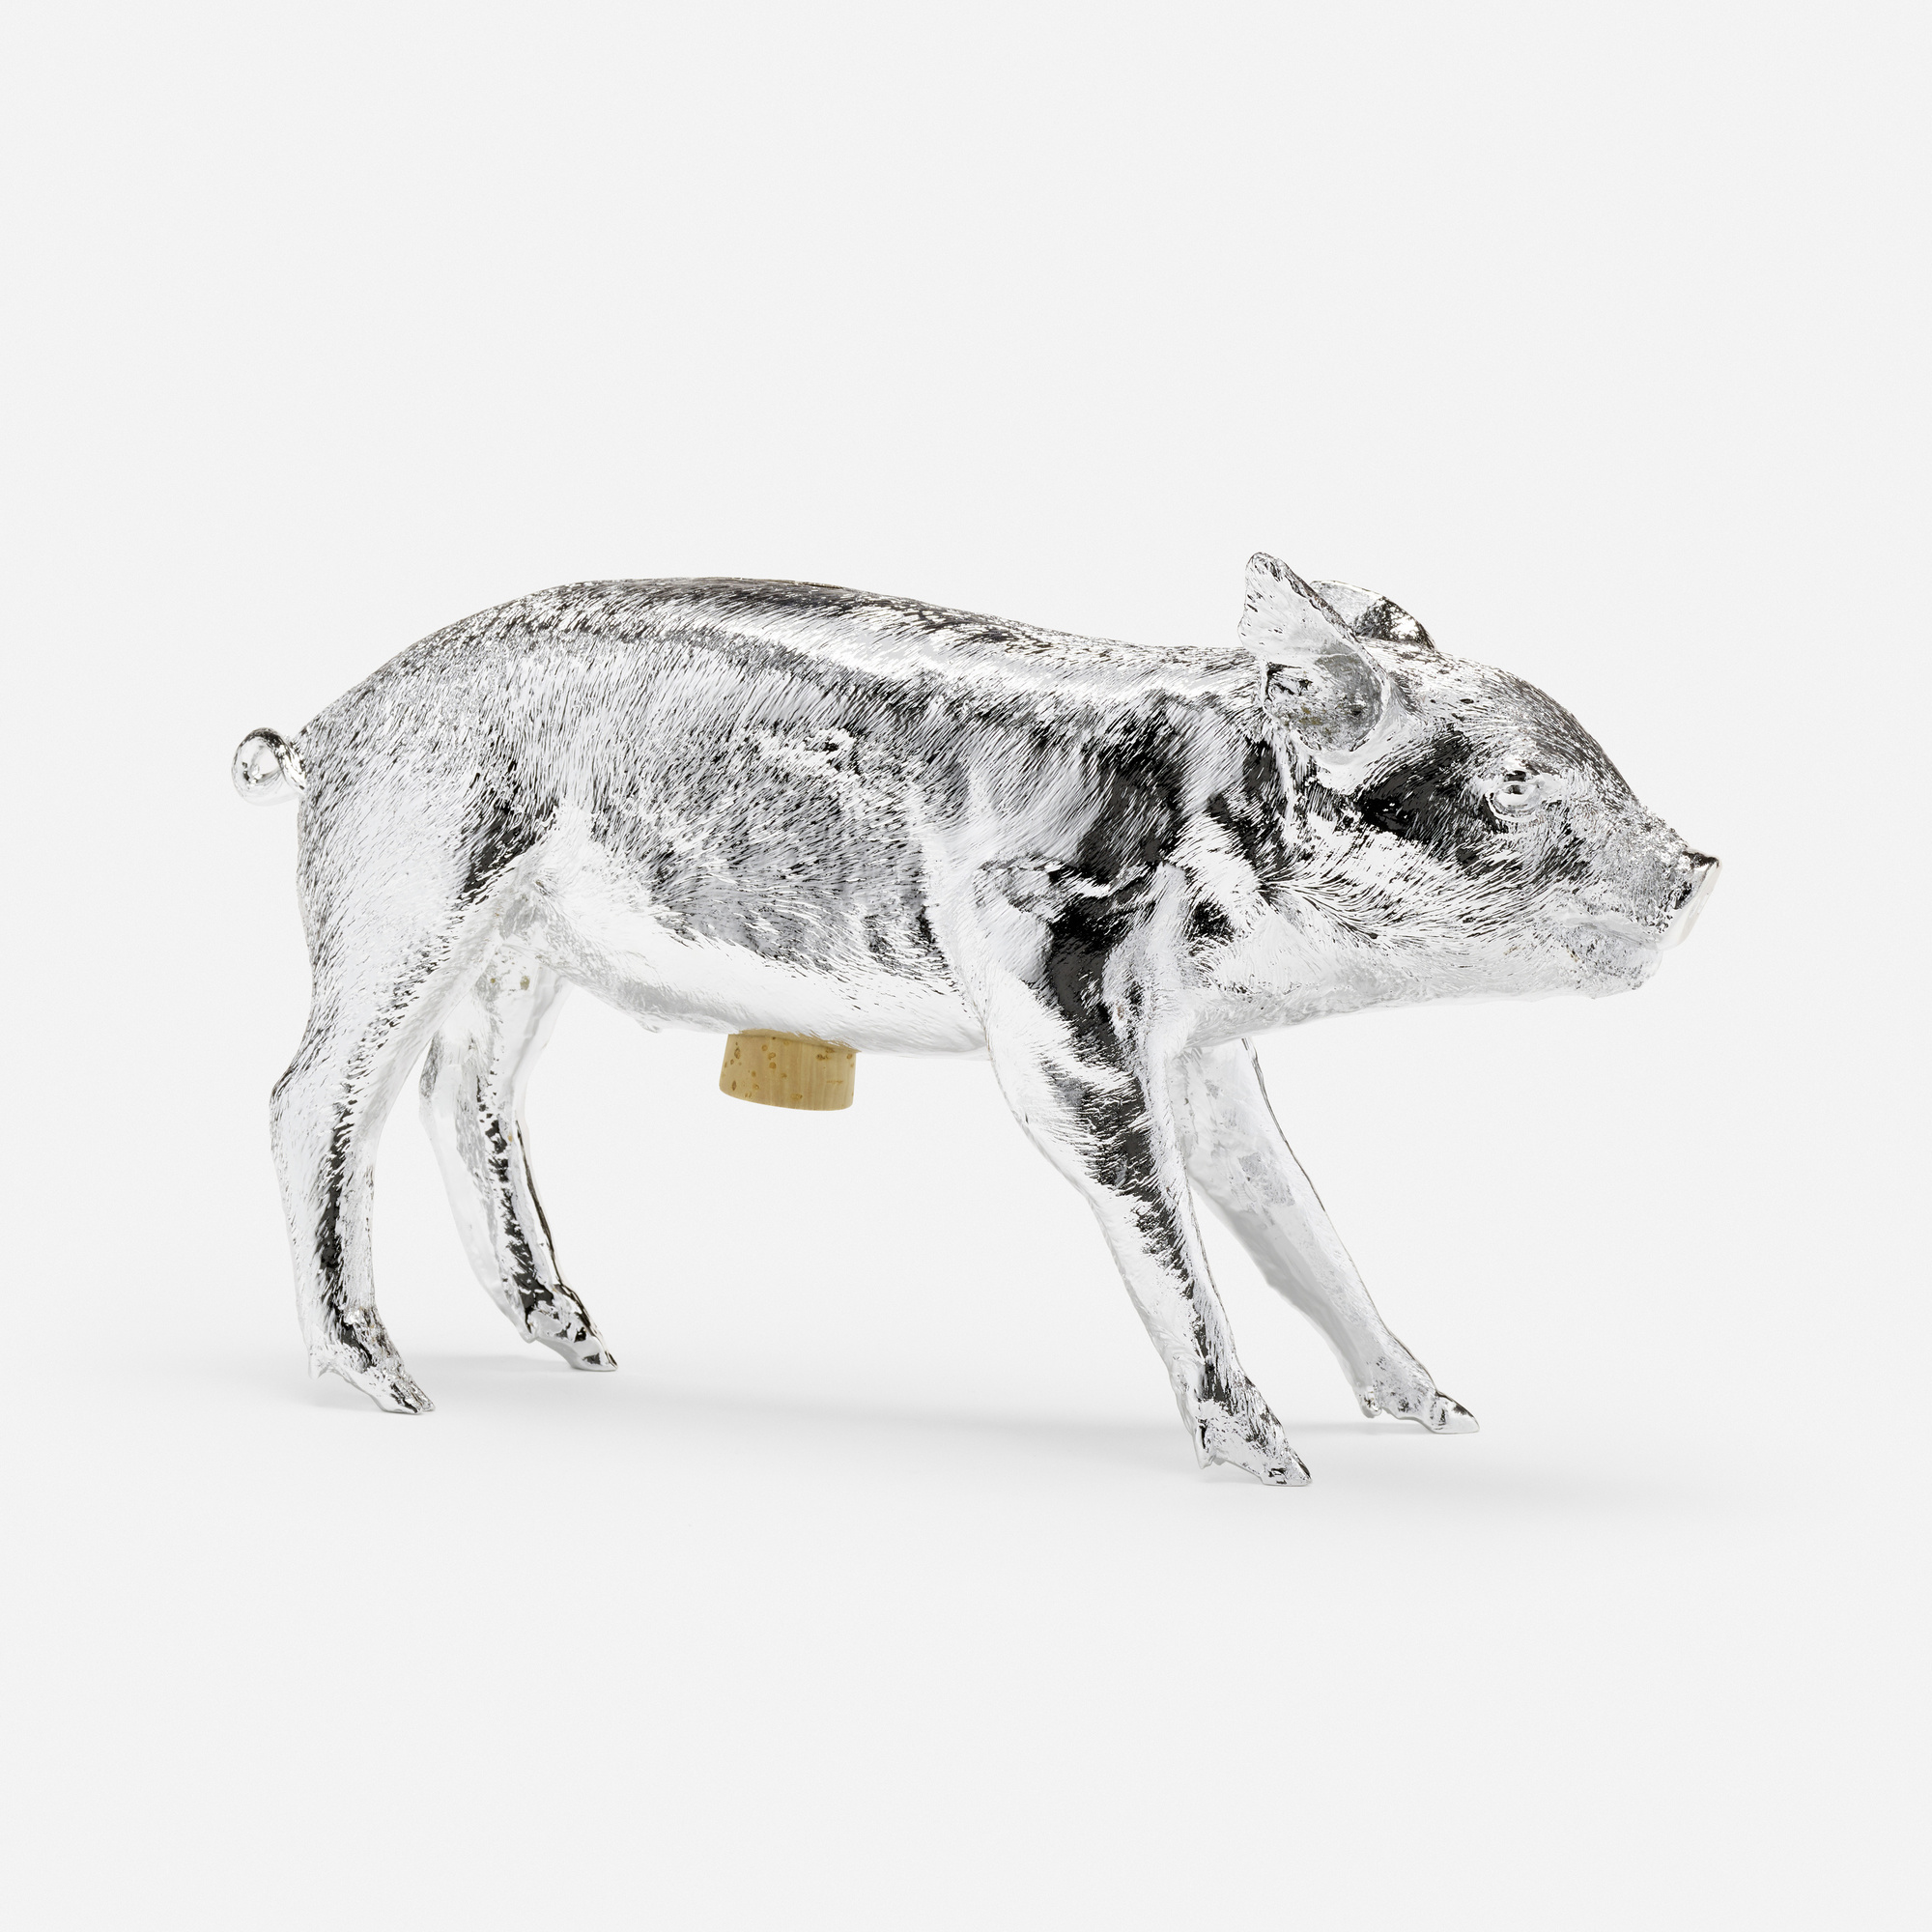 111: HARRY ALLEN, Bank in the Form of a Pig (Silver Chrome) < Be